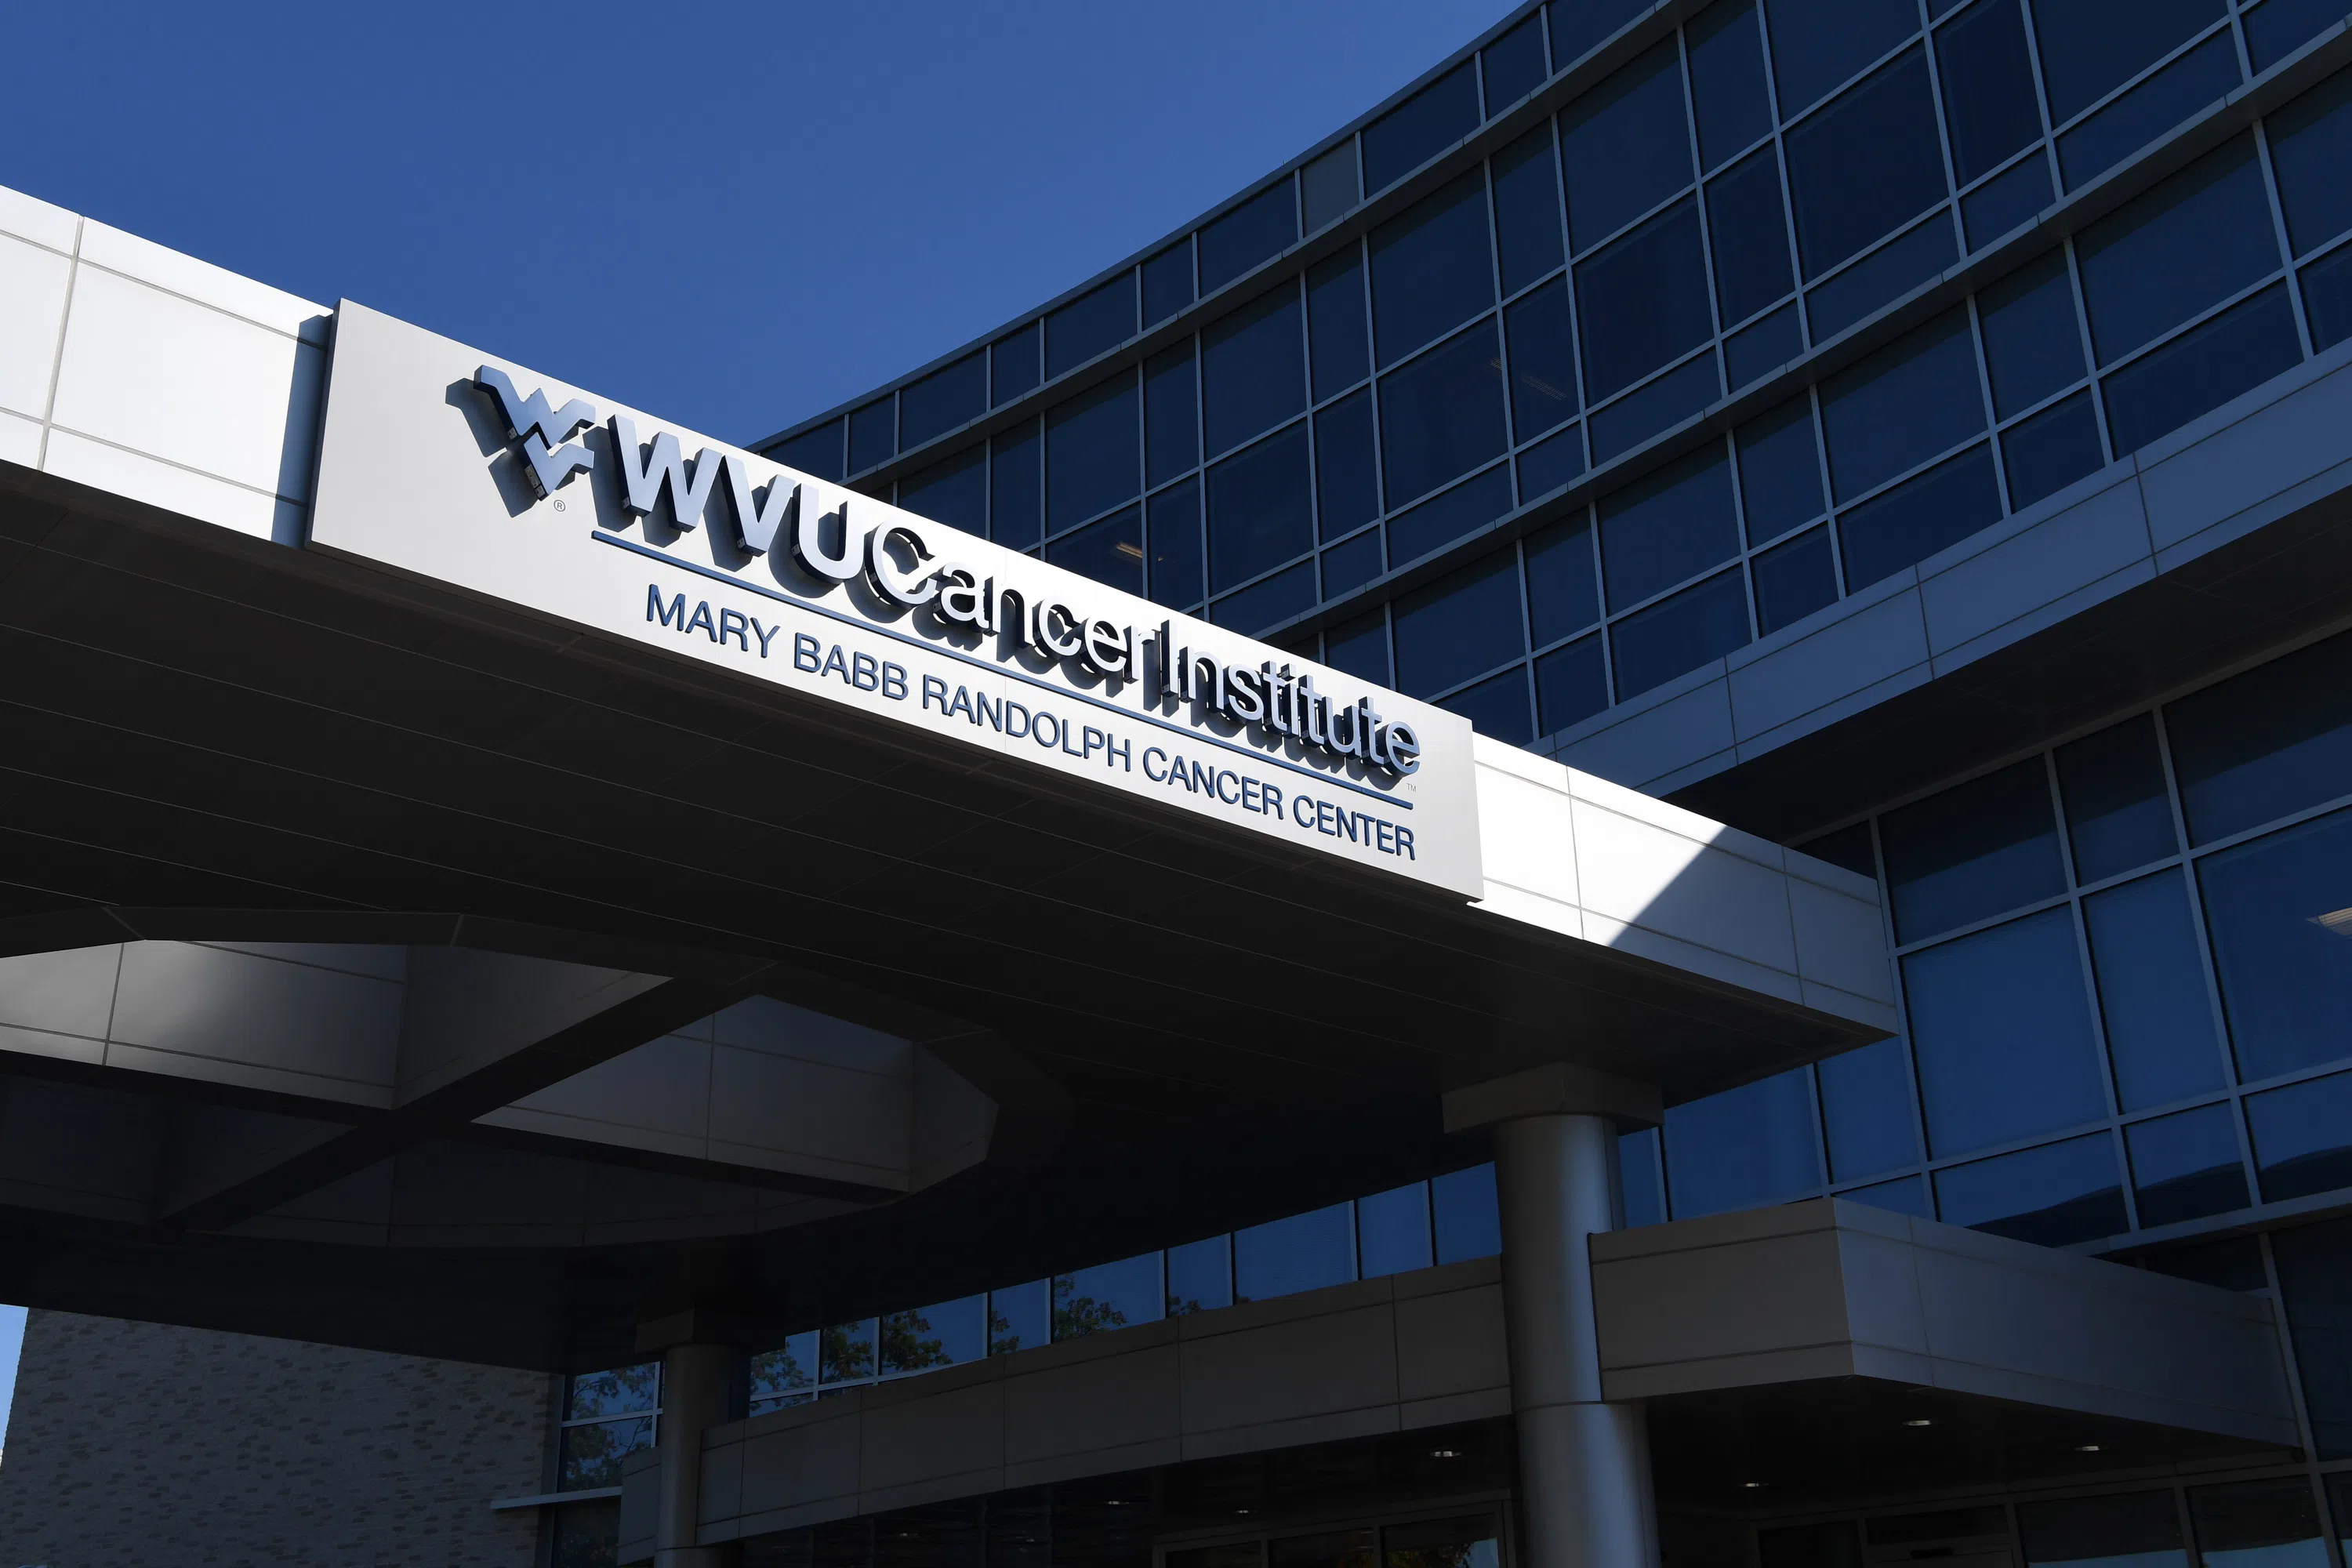 A sign on a building with glass windows reads "WVU Cancer Institute Mary Babb Randolph Cancer Center."